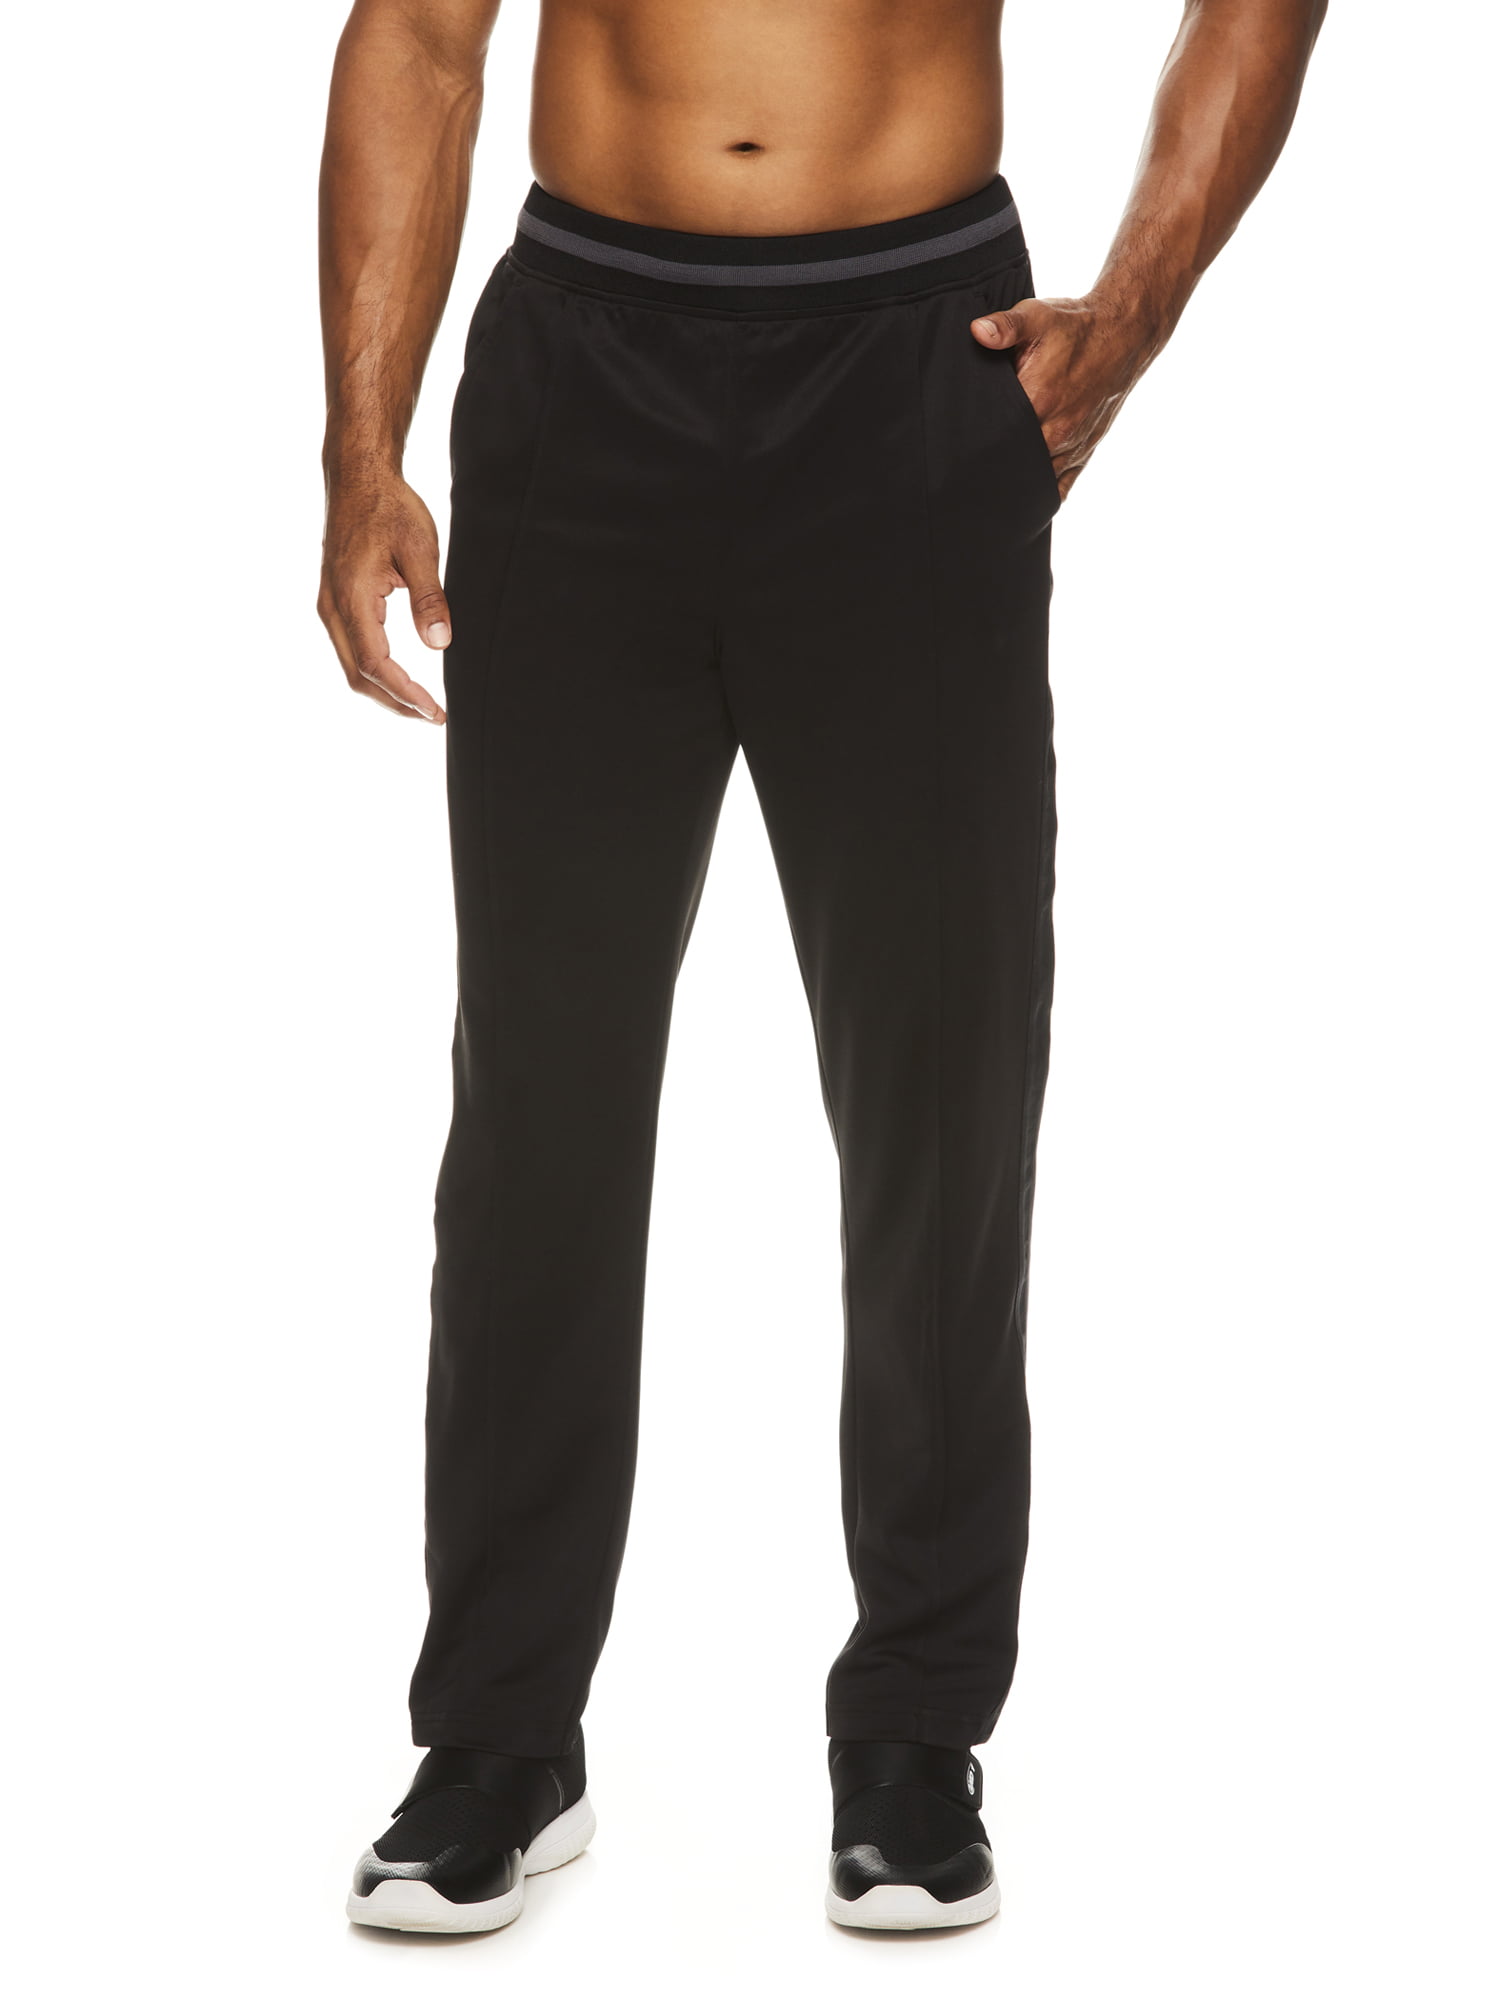 AND1 Men's and Big Men's Basketball Track Pant, up to 5XL - Walmart.com